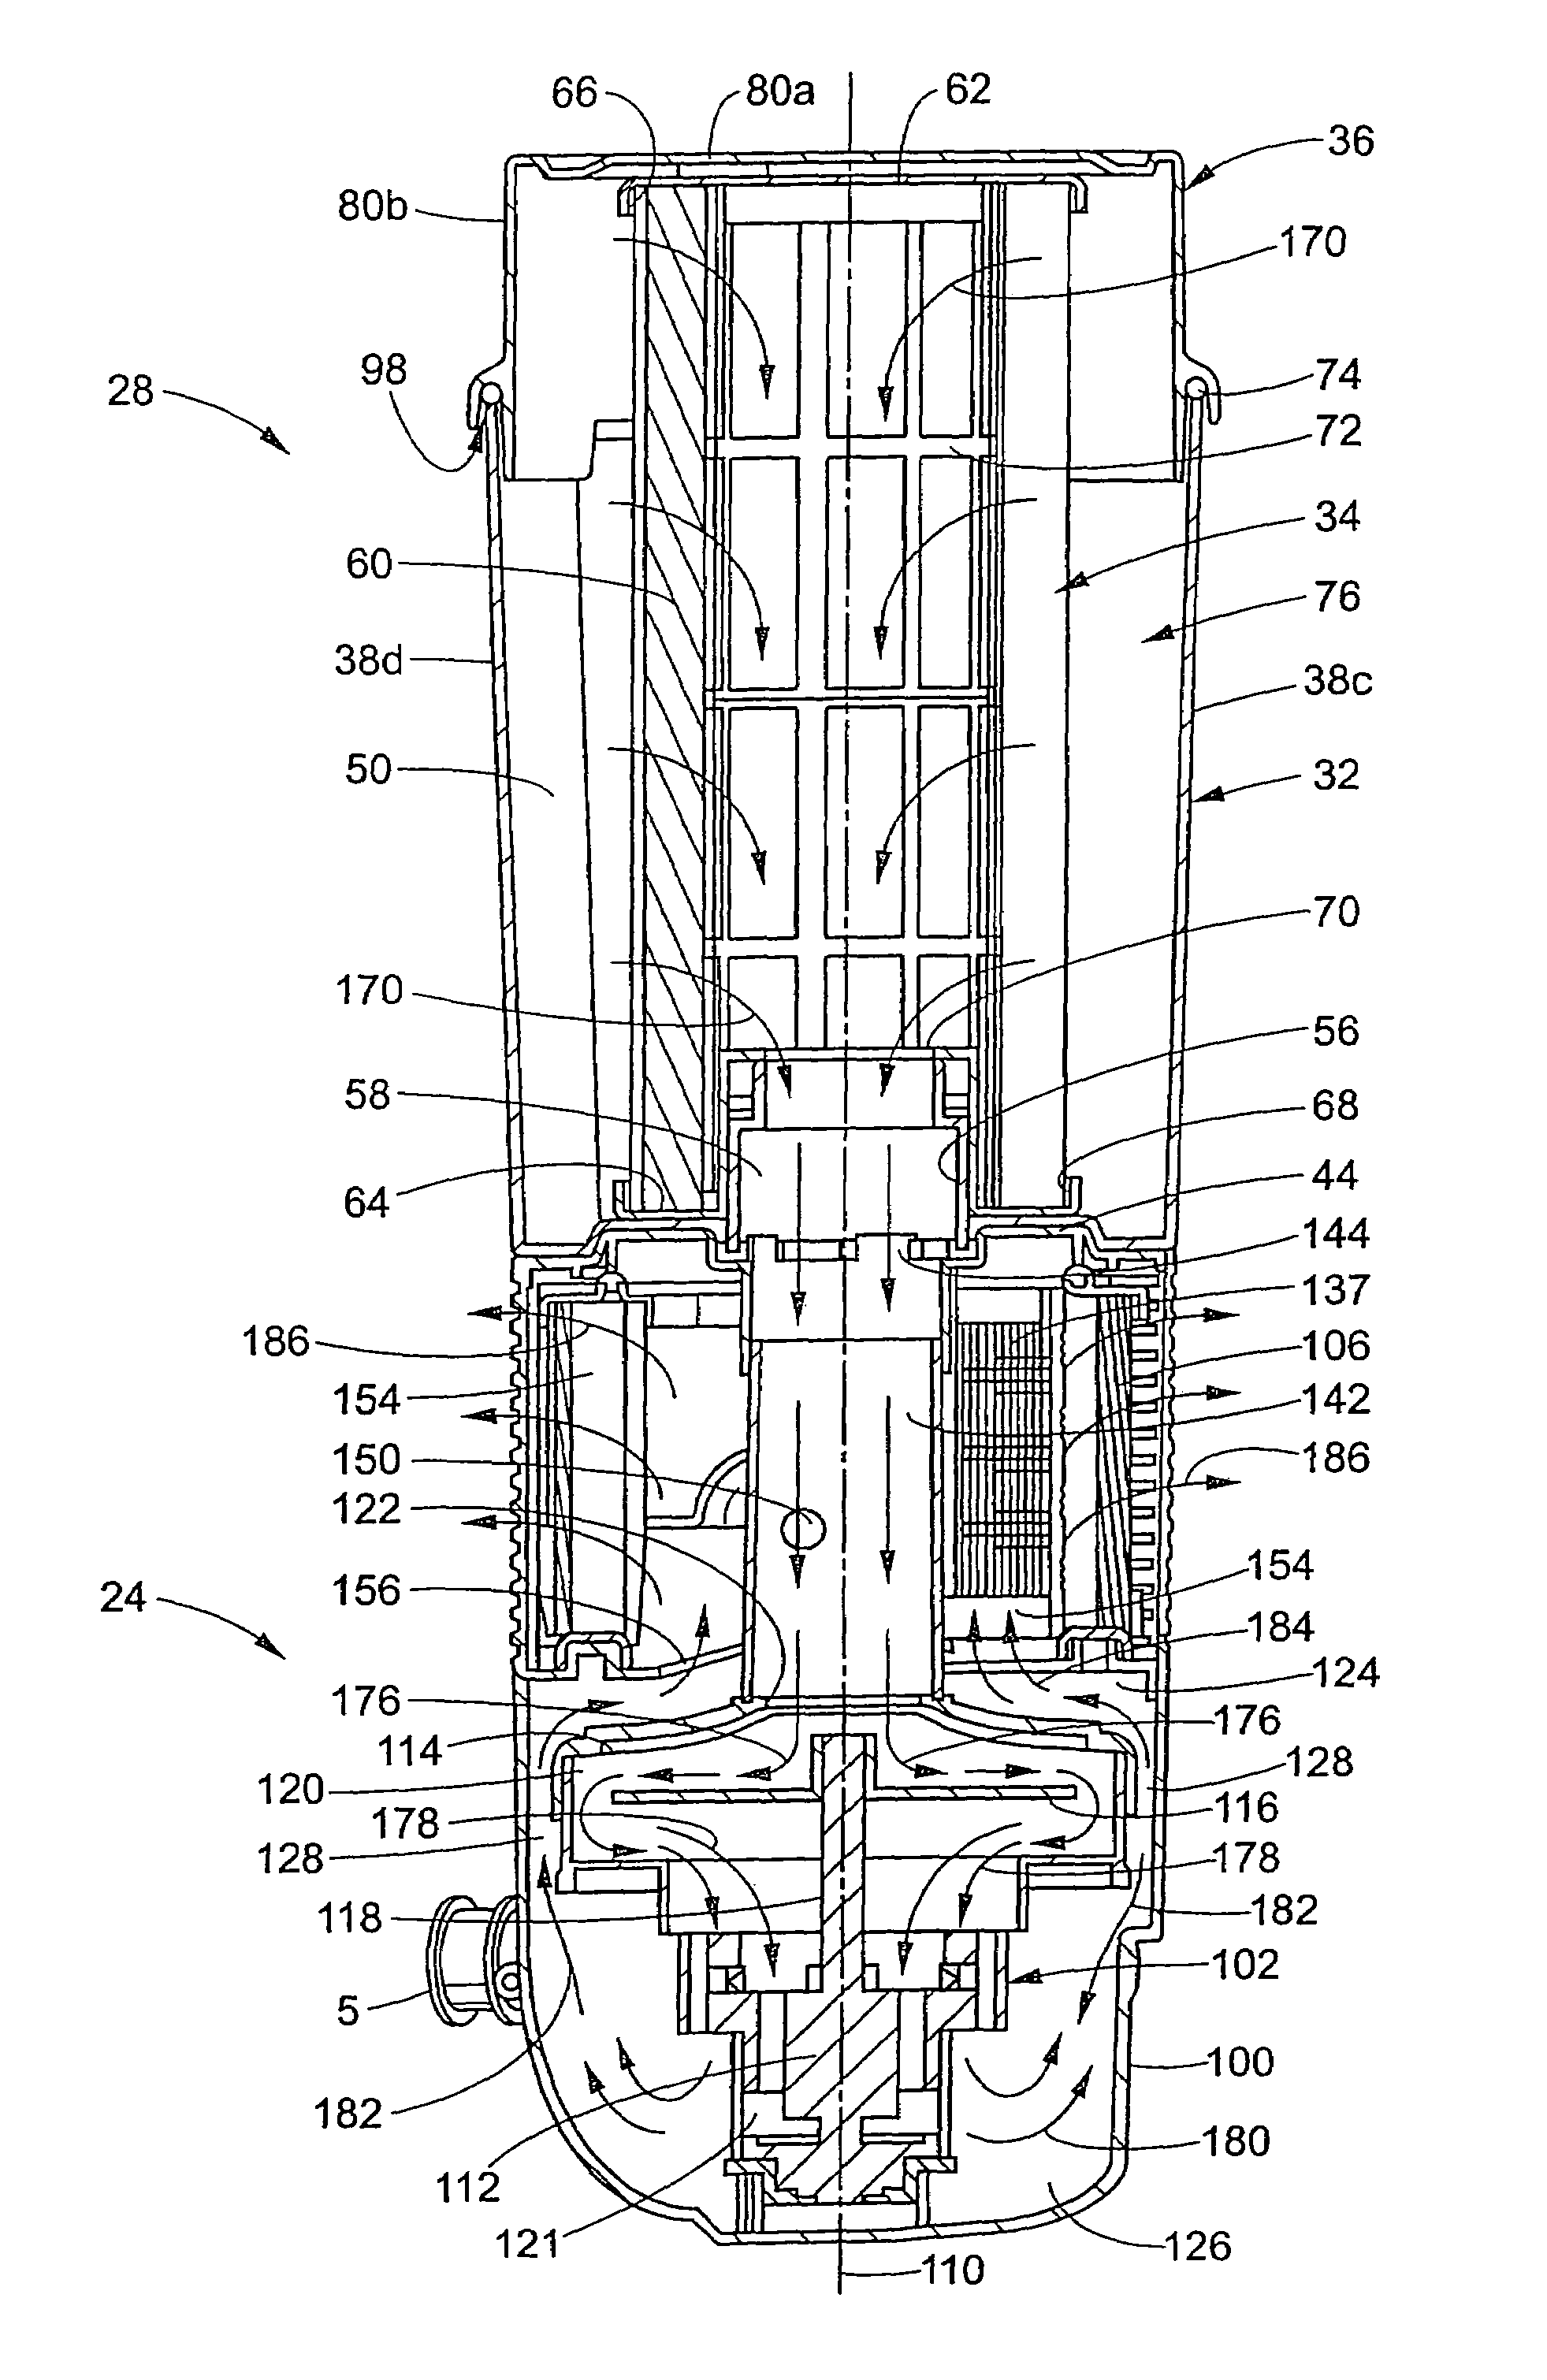 Vacuum cleaner with noise suppression features